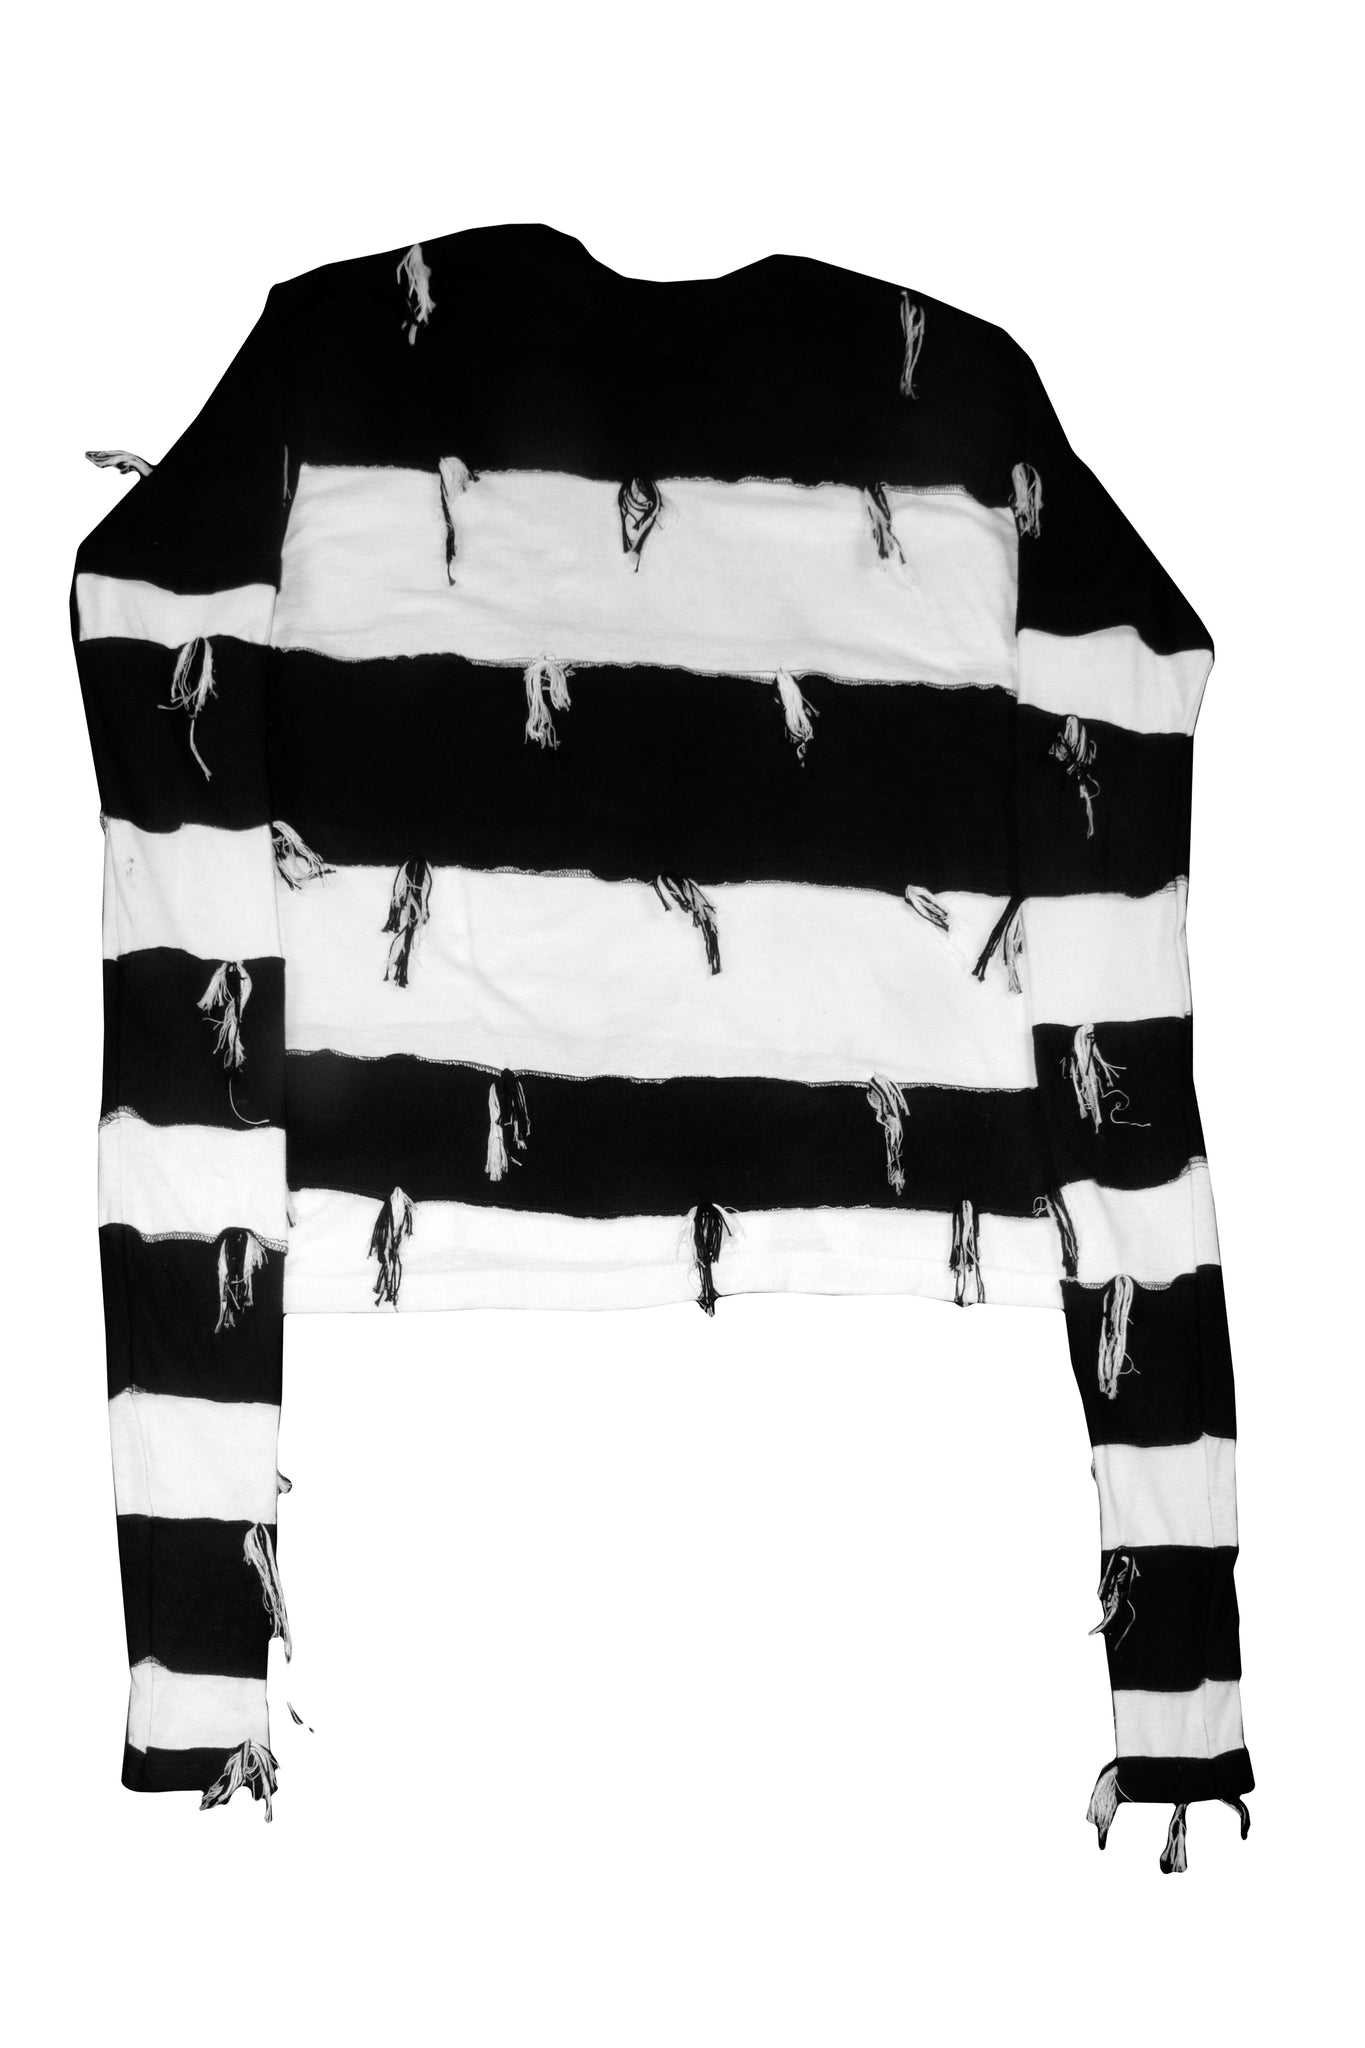 Striped Reconstructed Longsleeve Tee